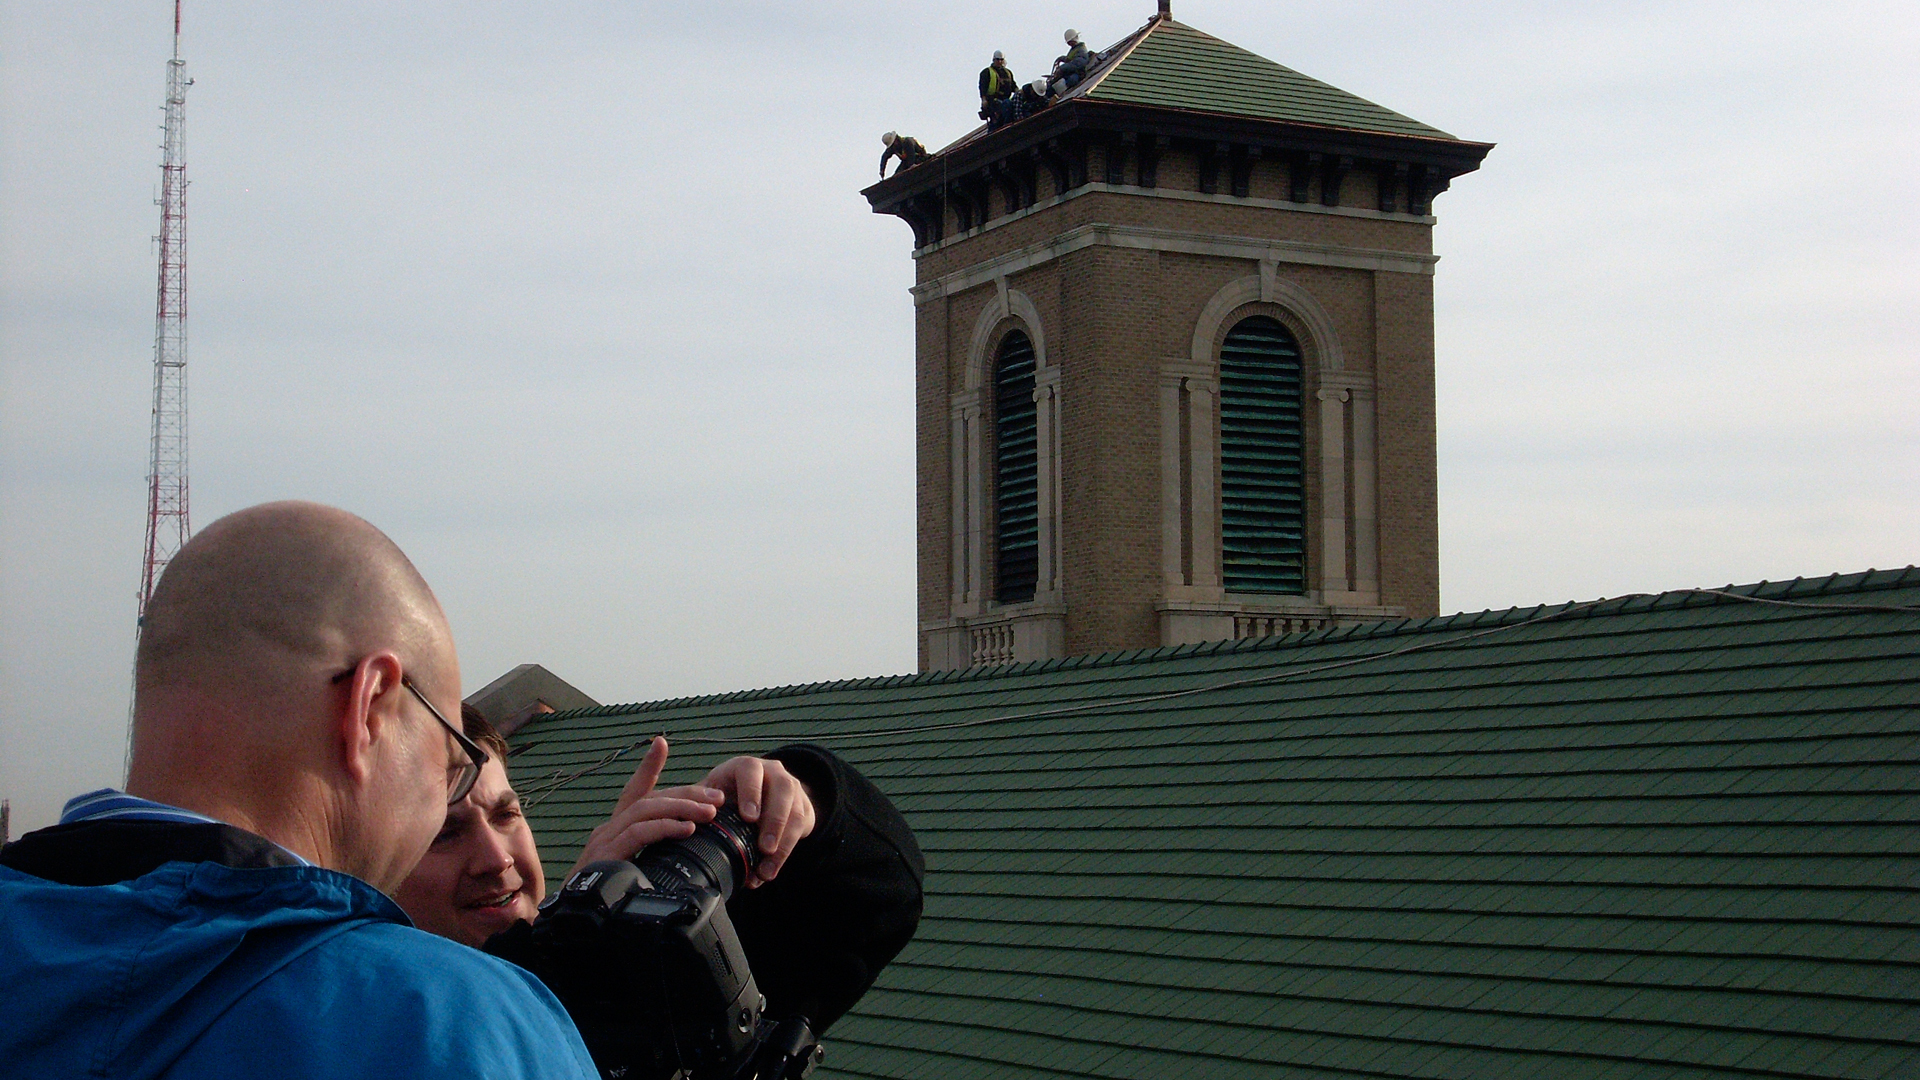 Filming-the-Roof-3.jpg